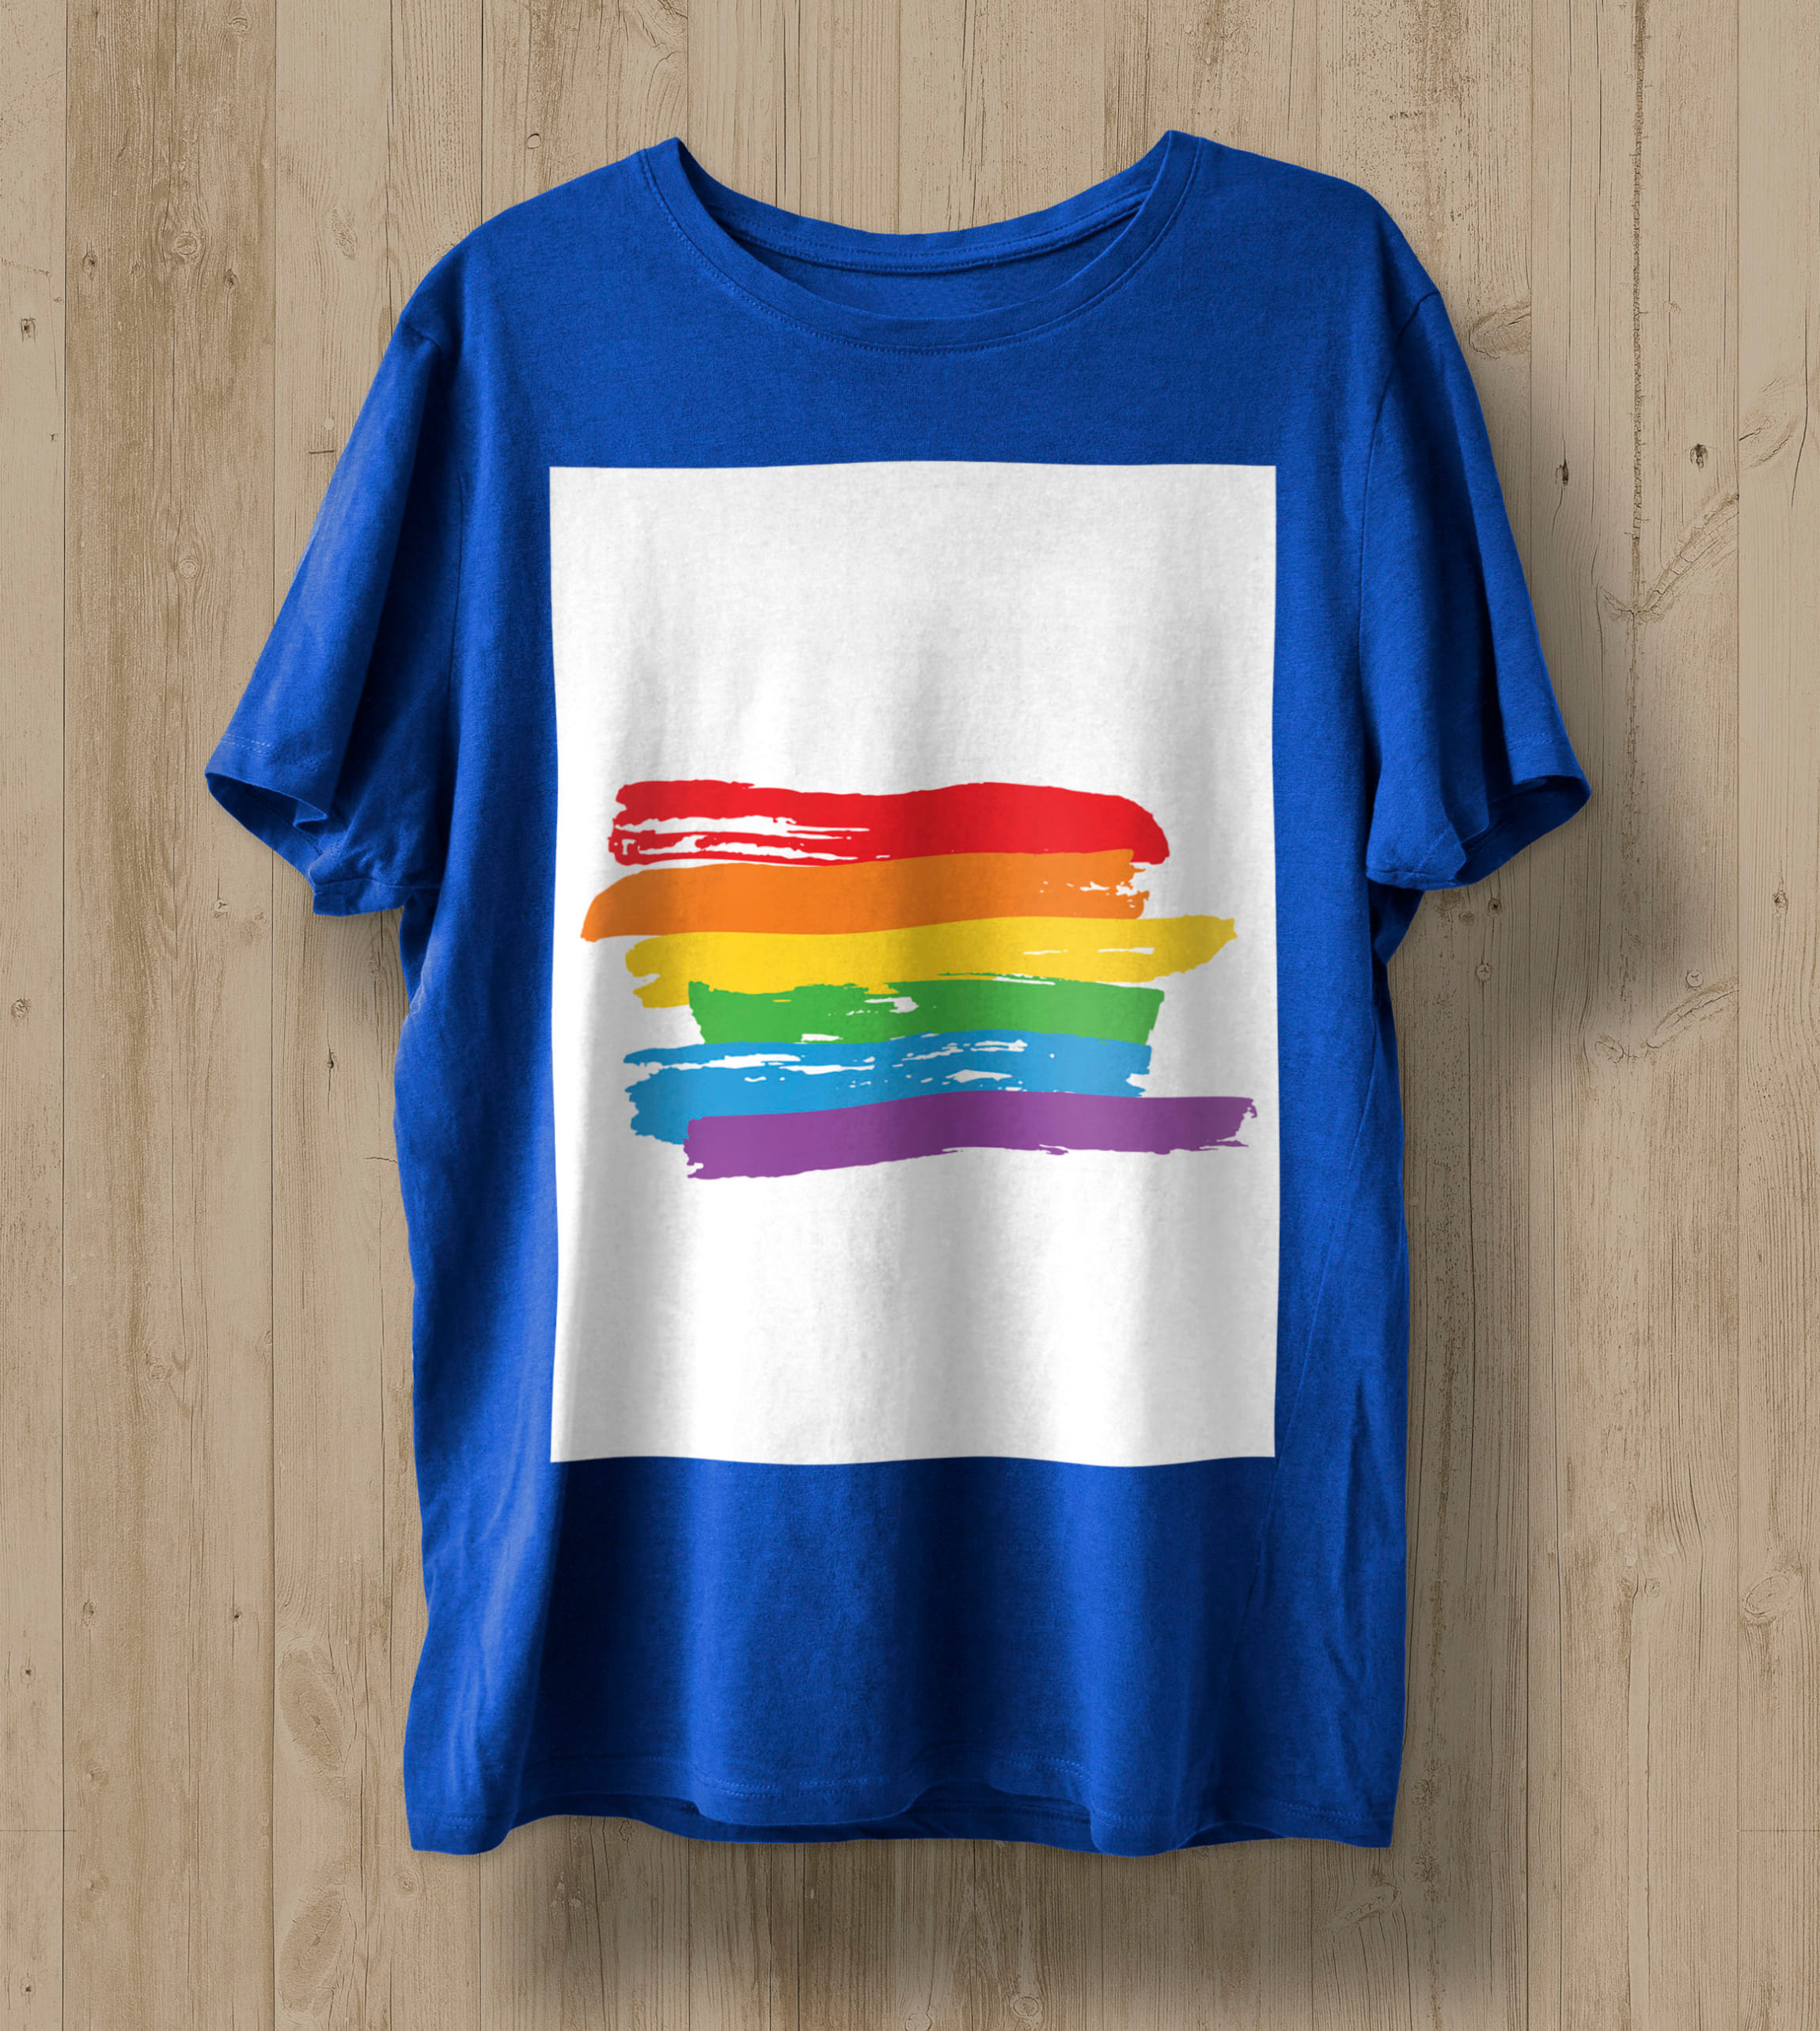 Blue T-shirt with lines in the colors of the LGBT flag in a white rectangle.